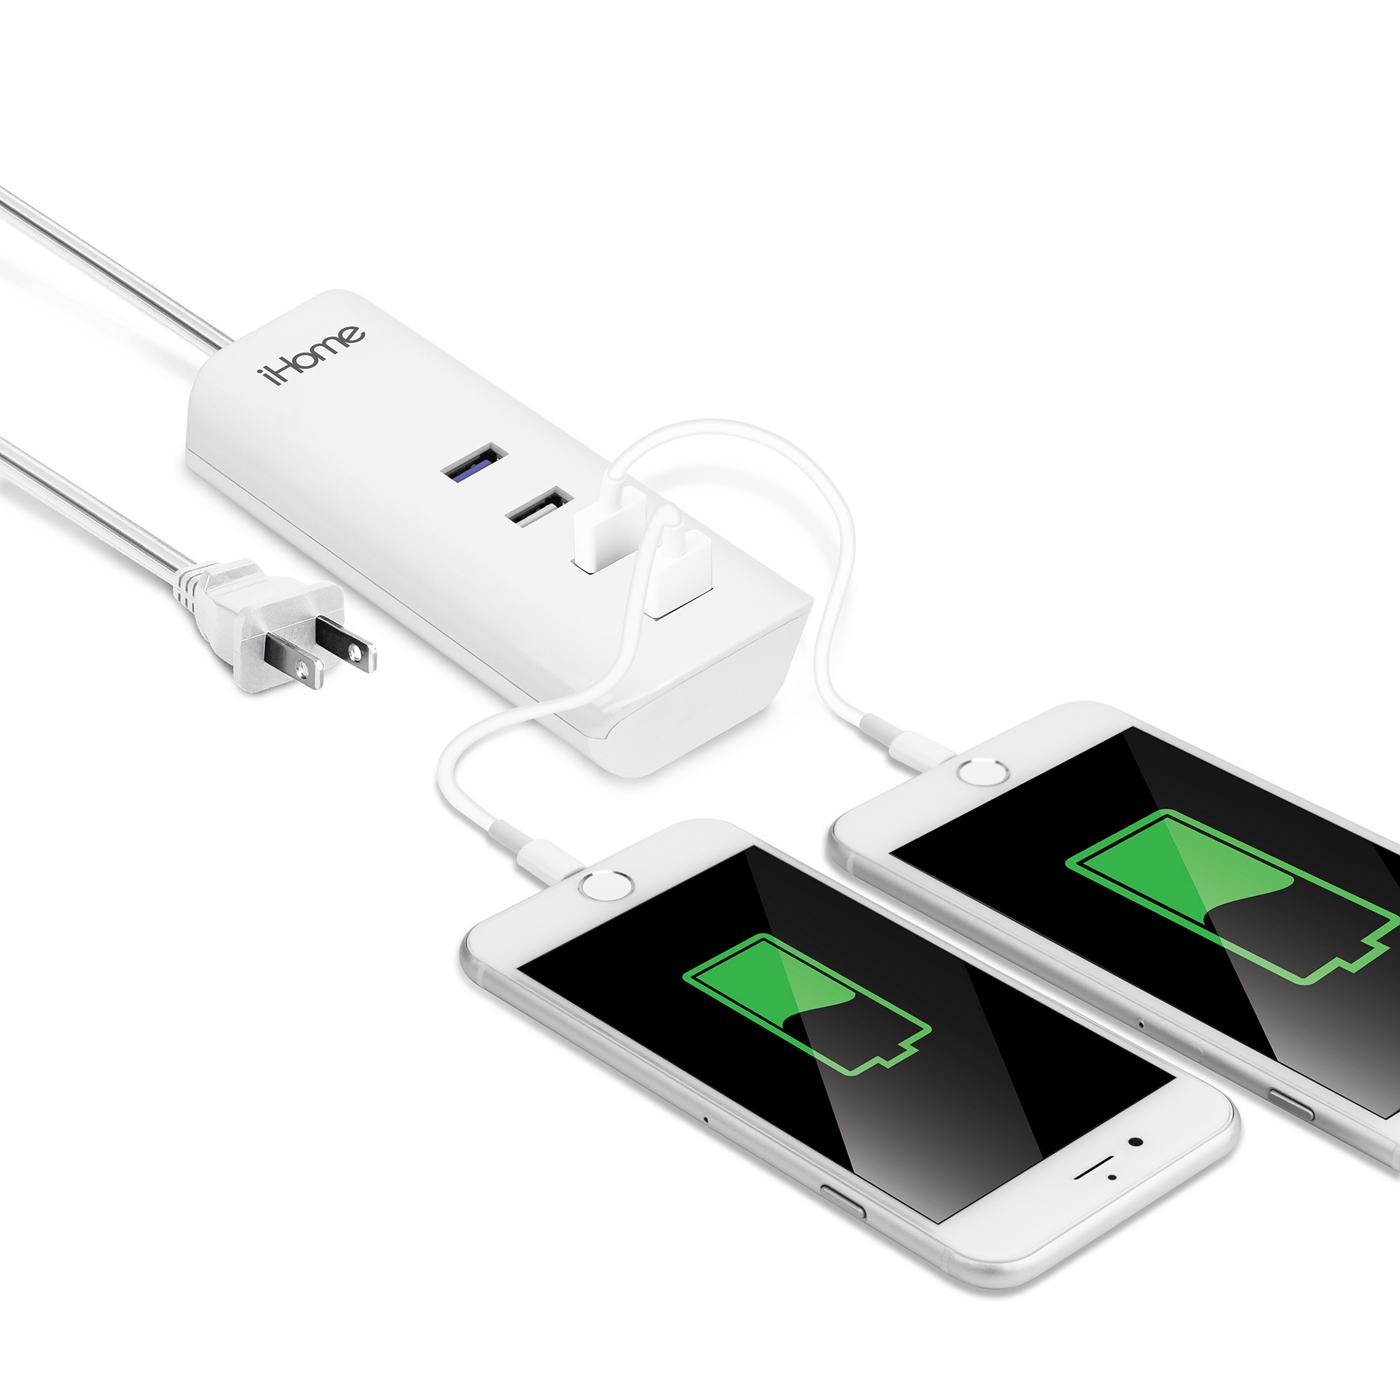 iHome 4-Port USB Charger - White; image 2 of 2